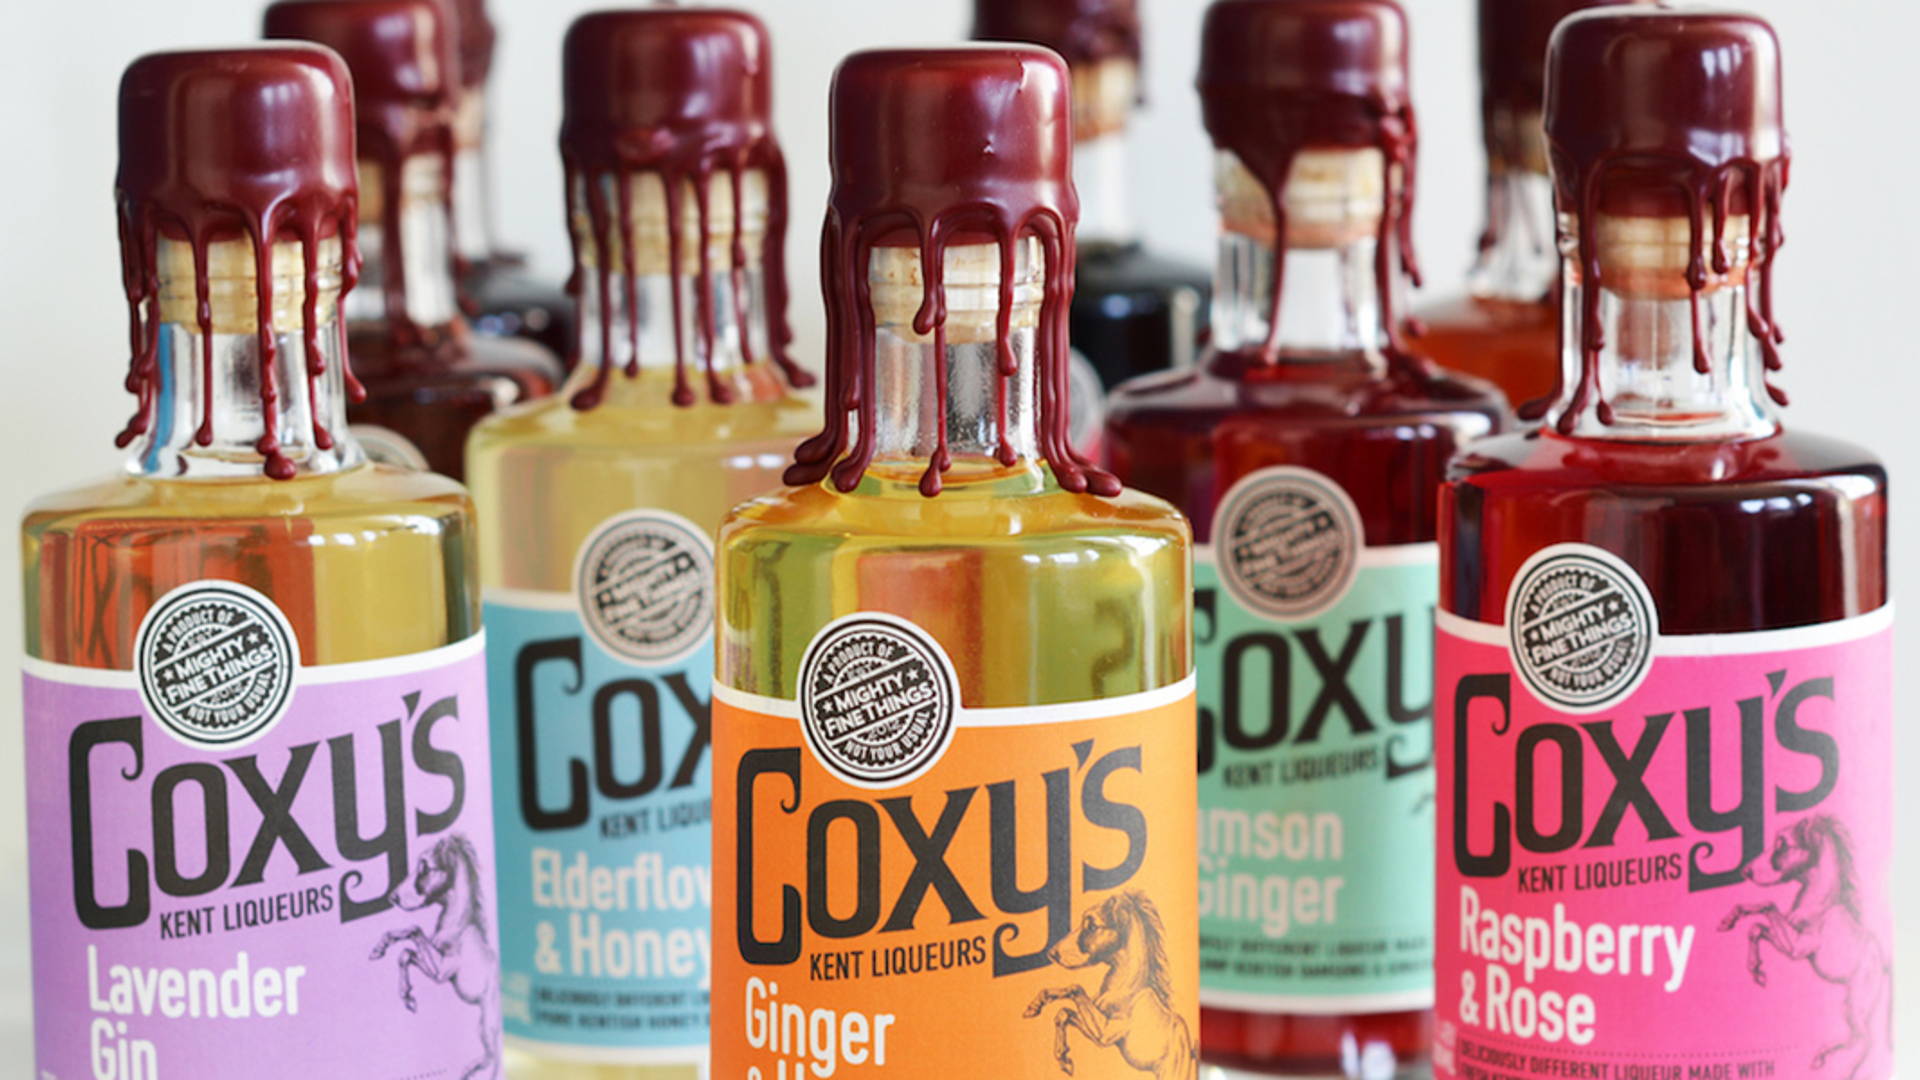 Featured image for Coxy's Kent Liquers